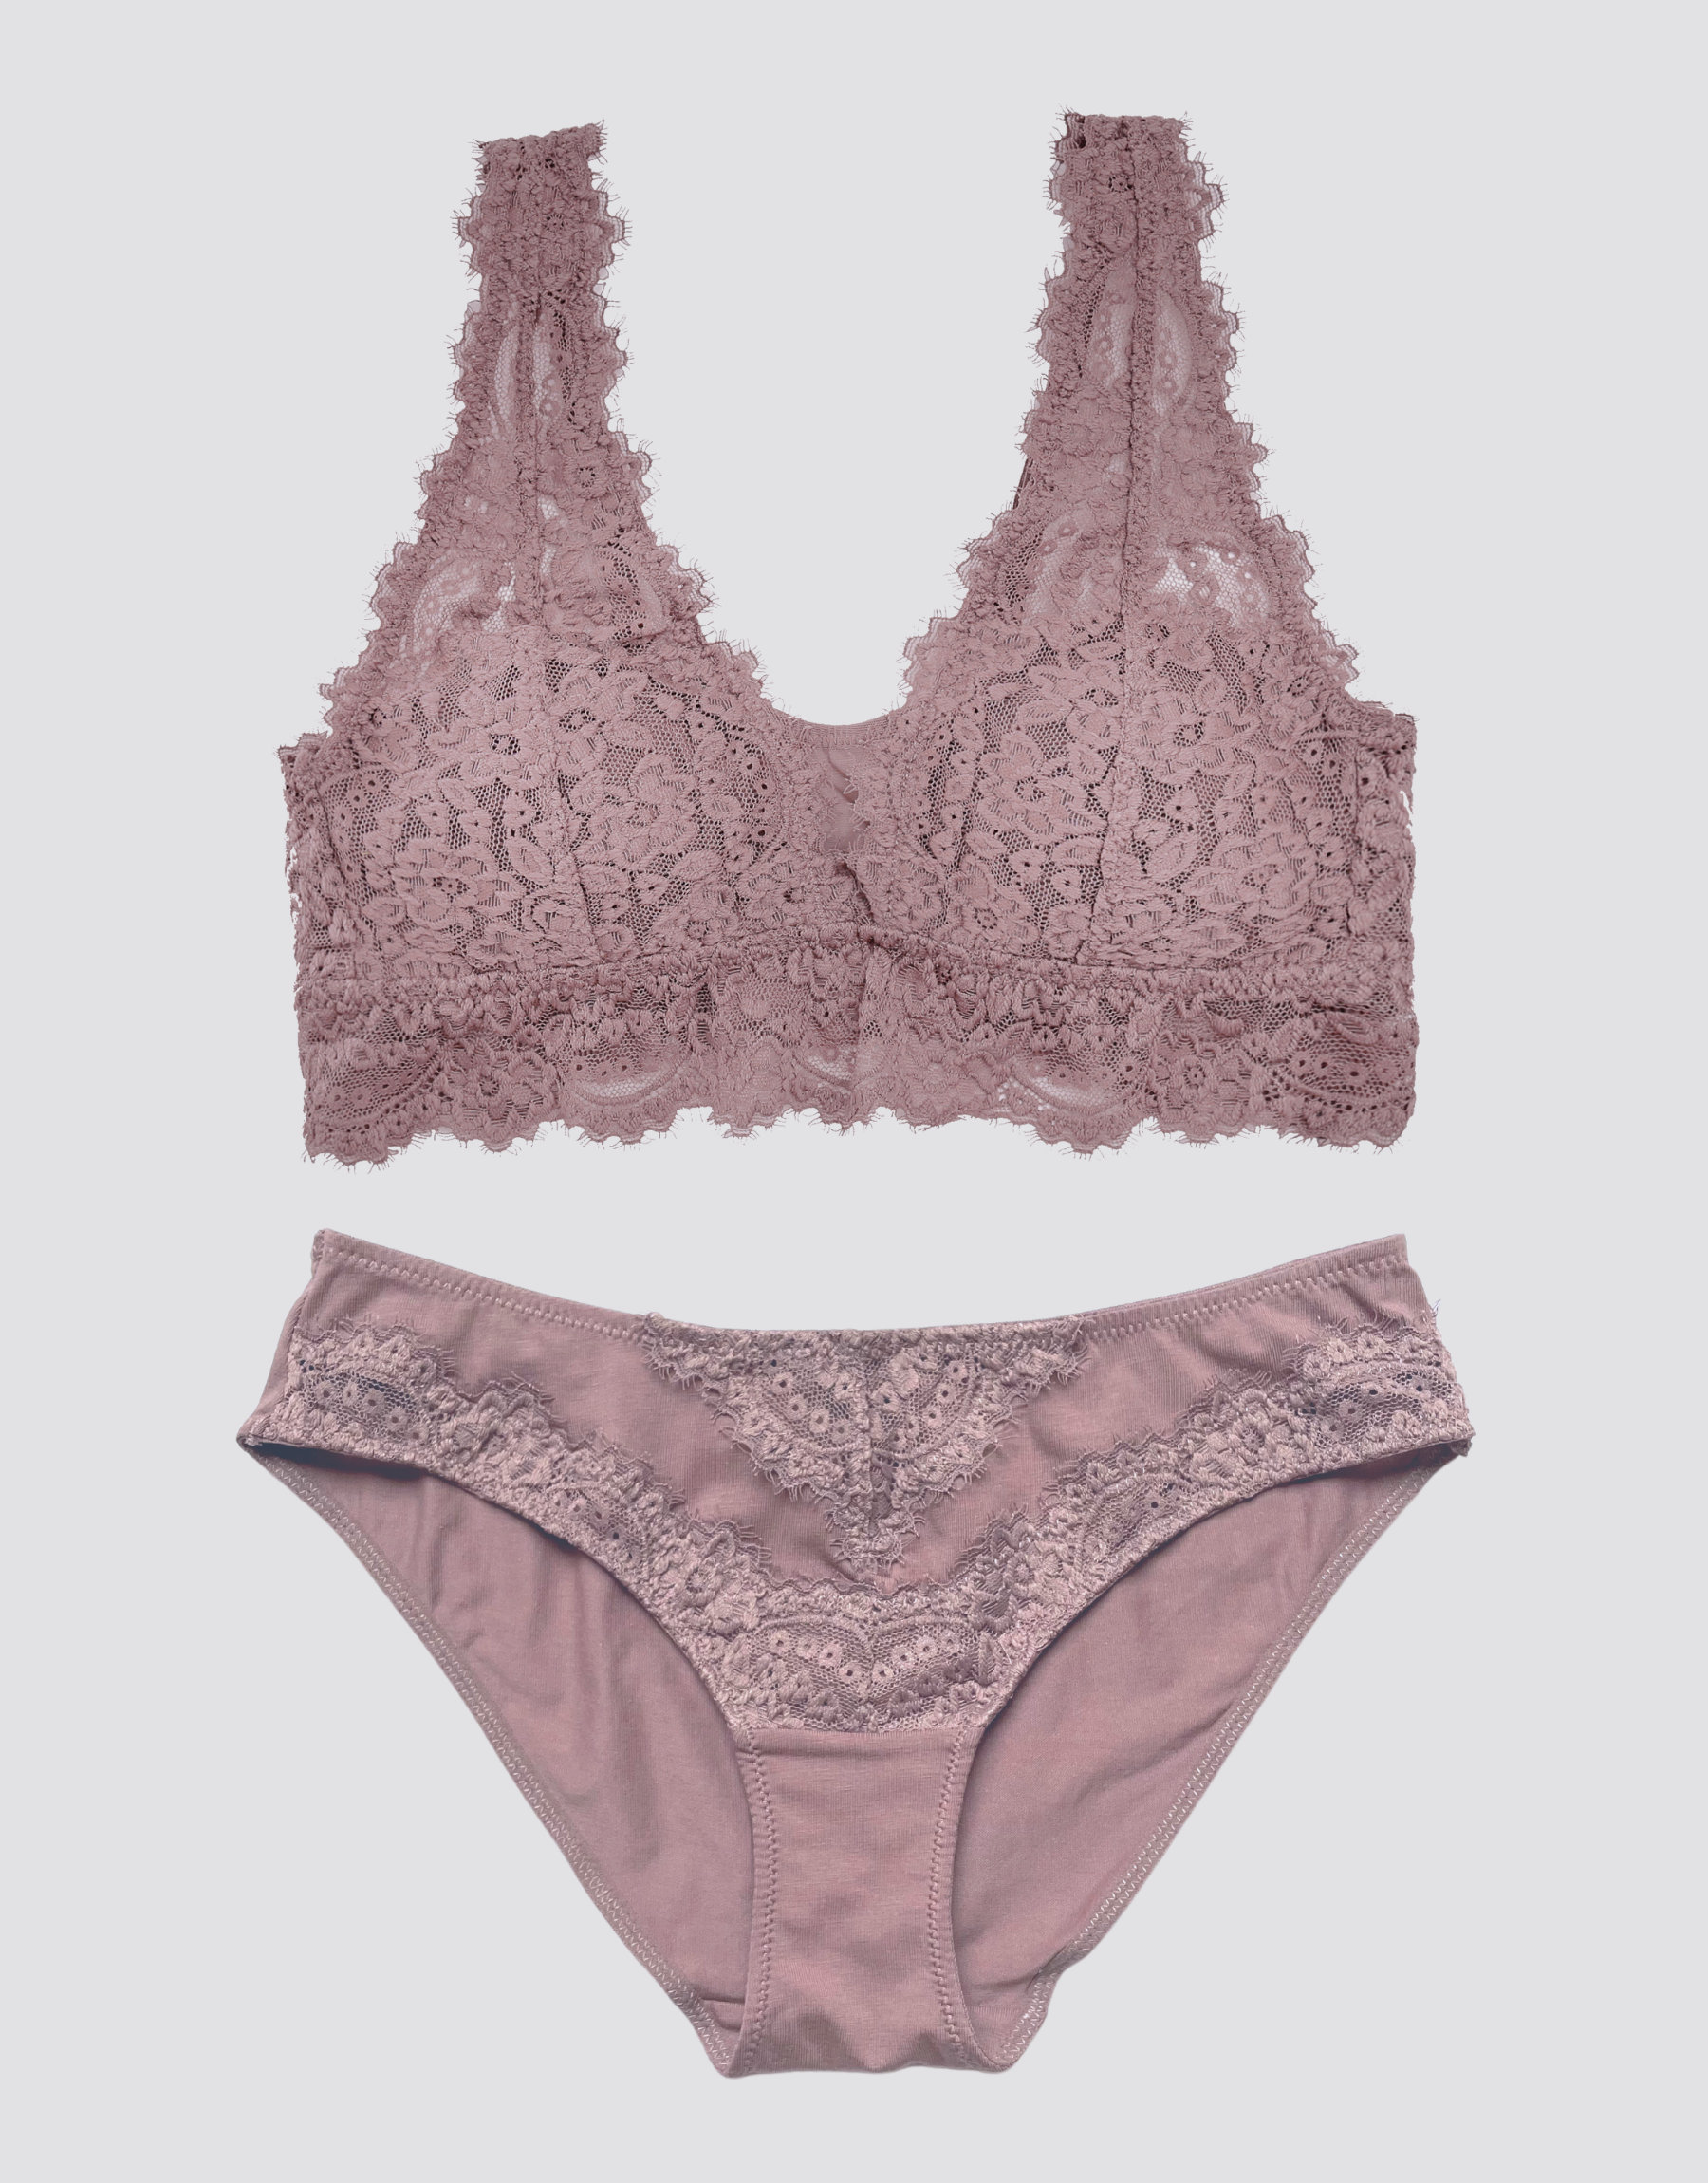 Curve Muse Plunge Bralette with Floral Lace-2pack-PINK,MAUVE-XXXL:42D 42DD  42DDD 44B 44C 44D 44DD 44DDD 46B 46C